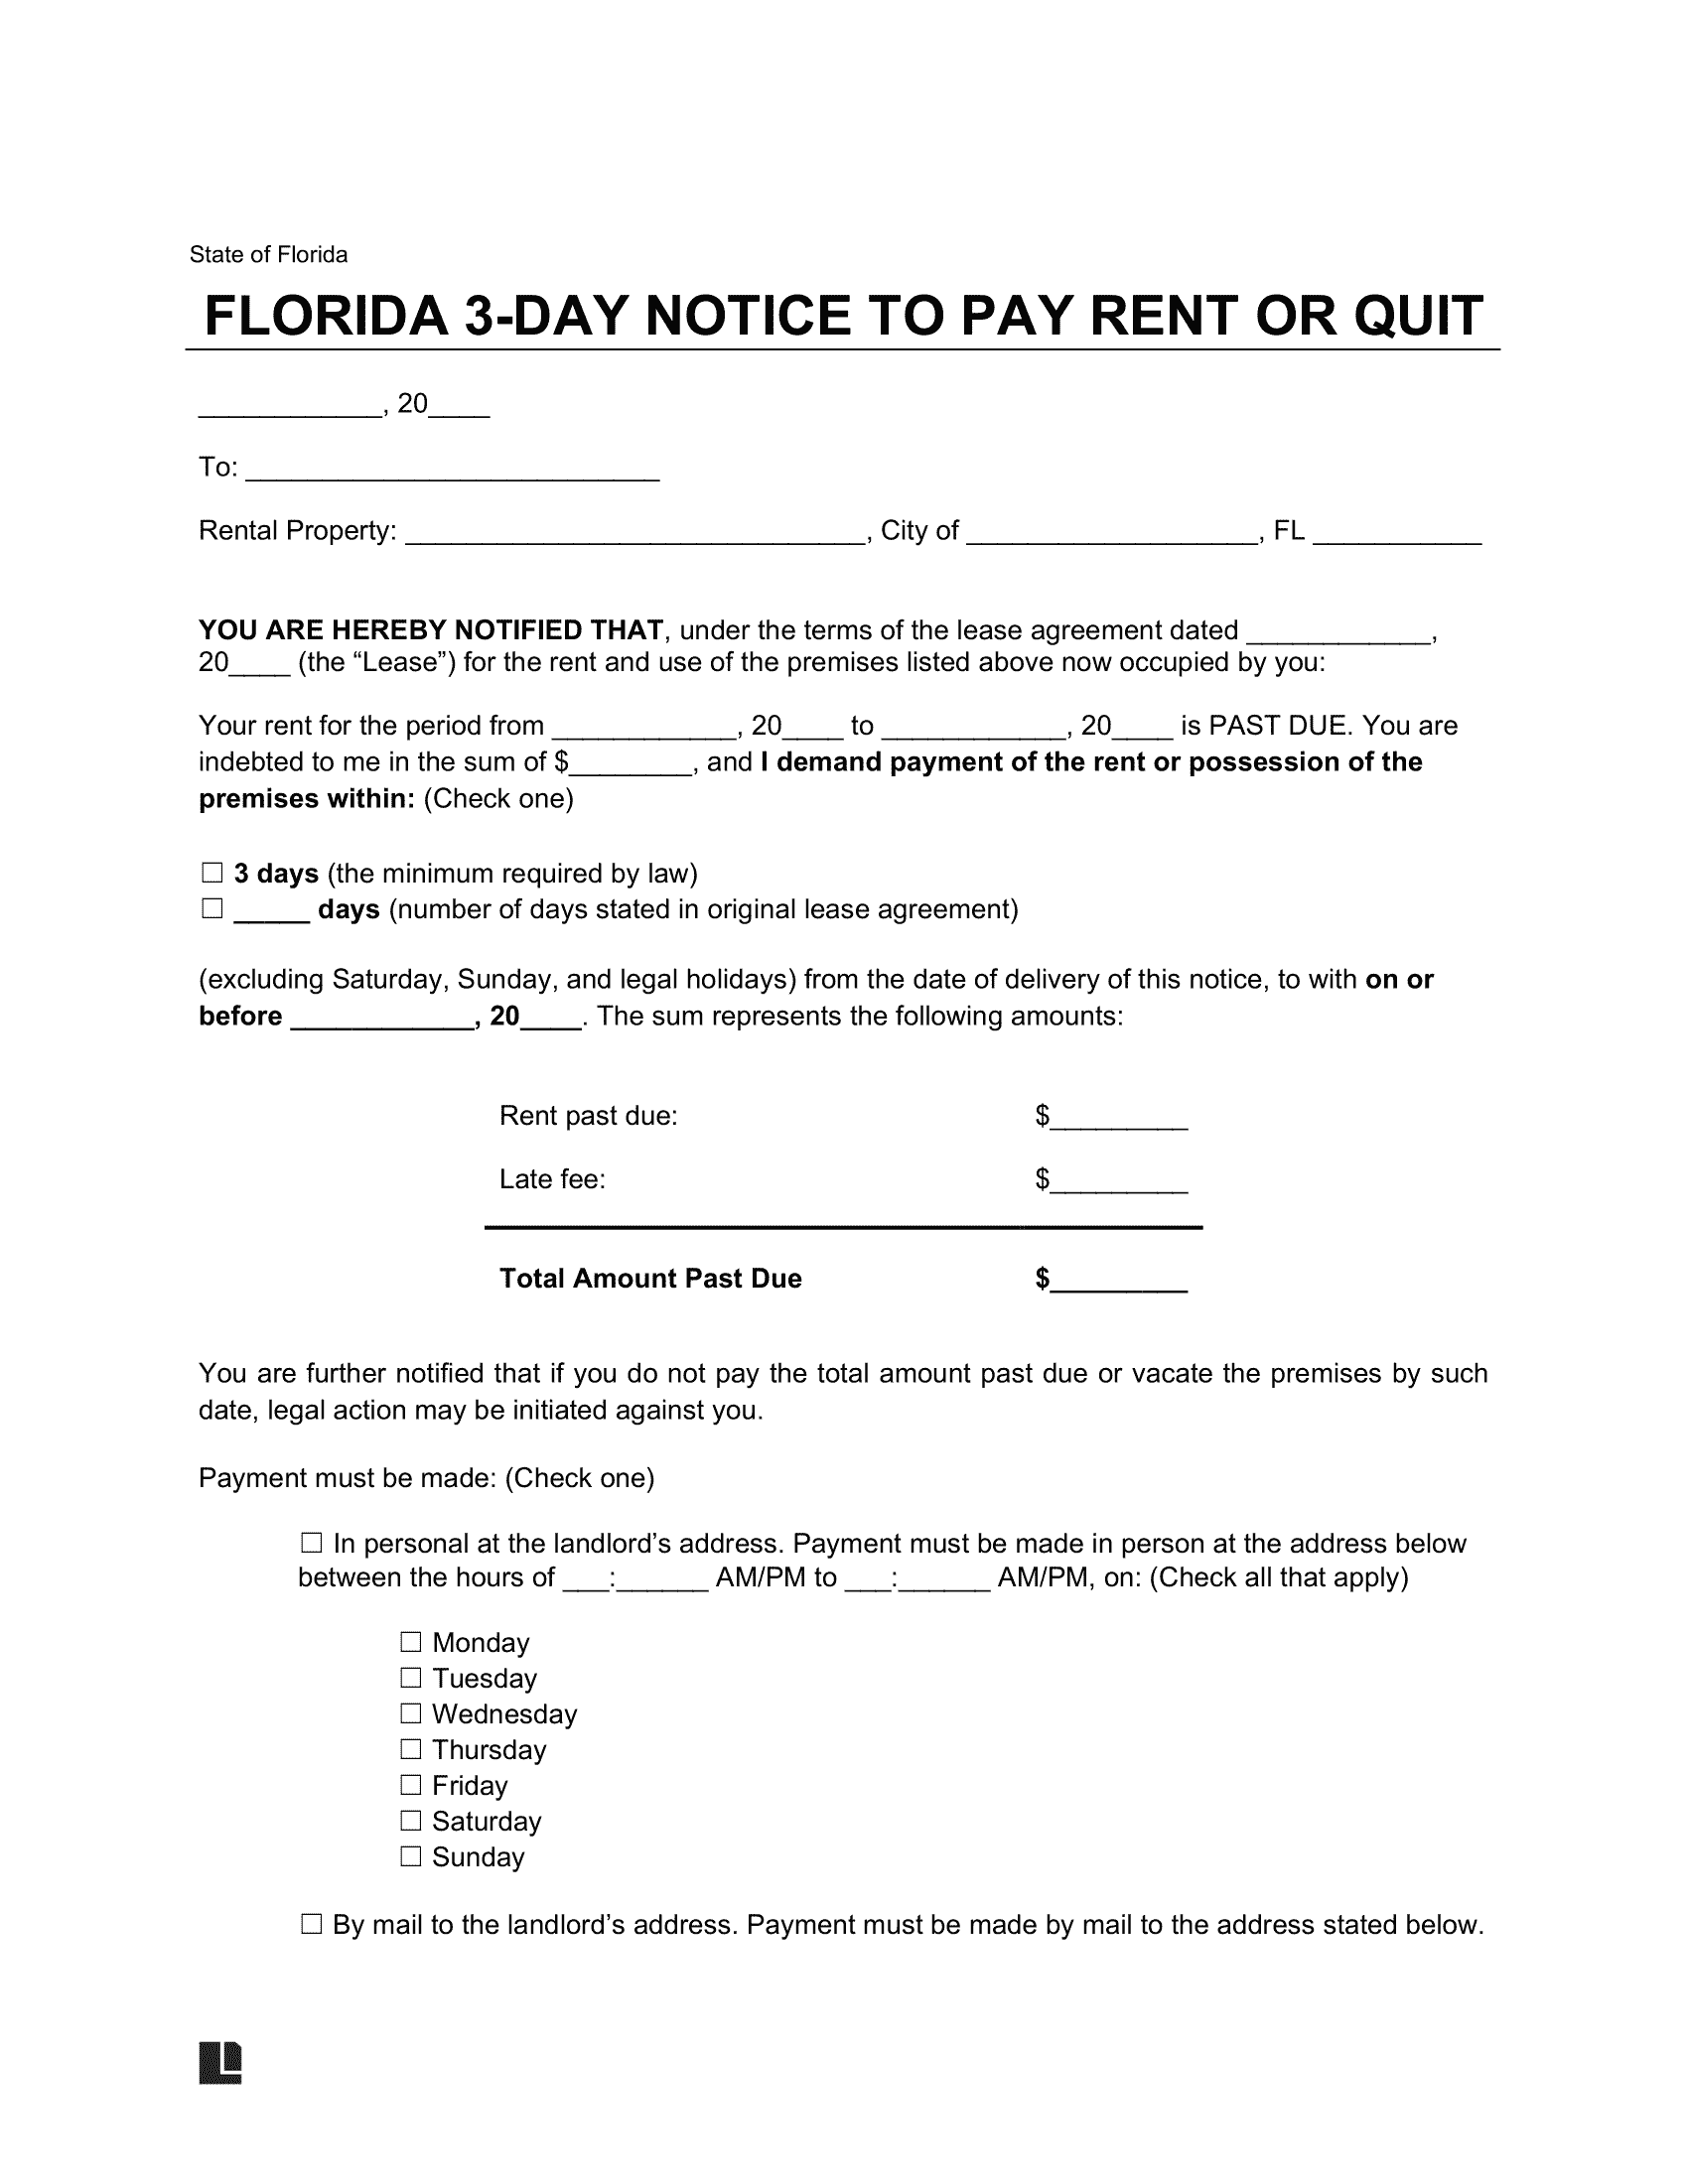 Florida 3-Day Eviction Notice to Quit for Non-Payment of Rent